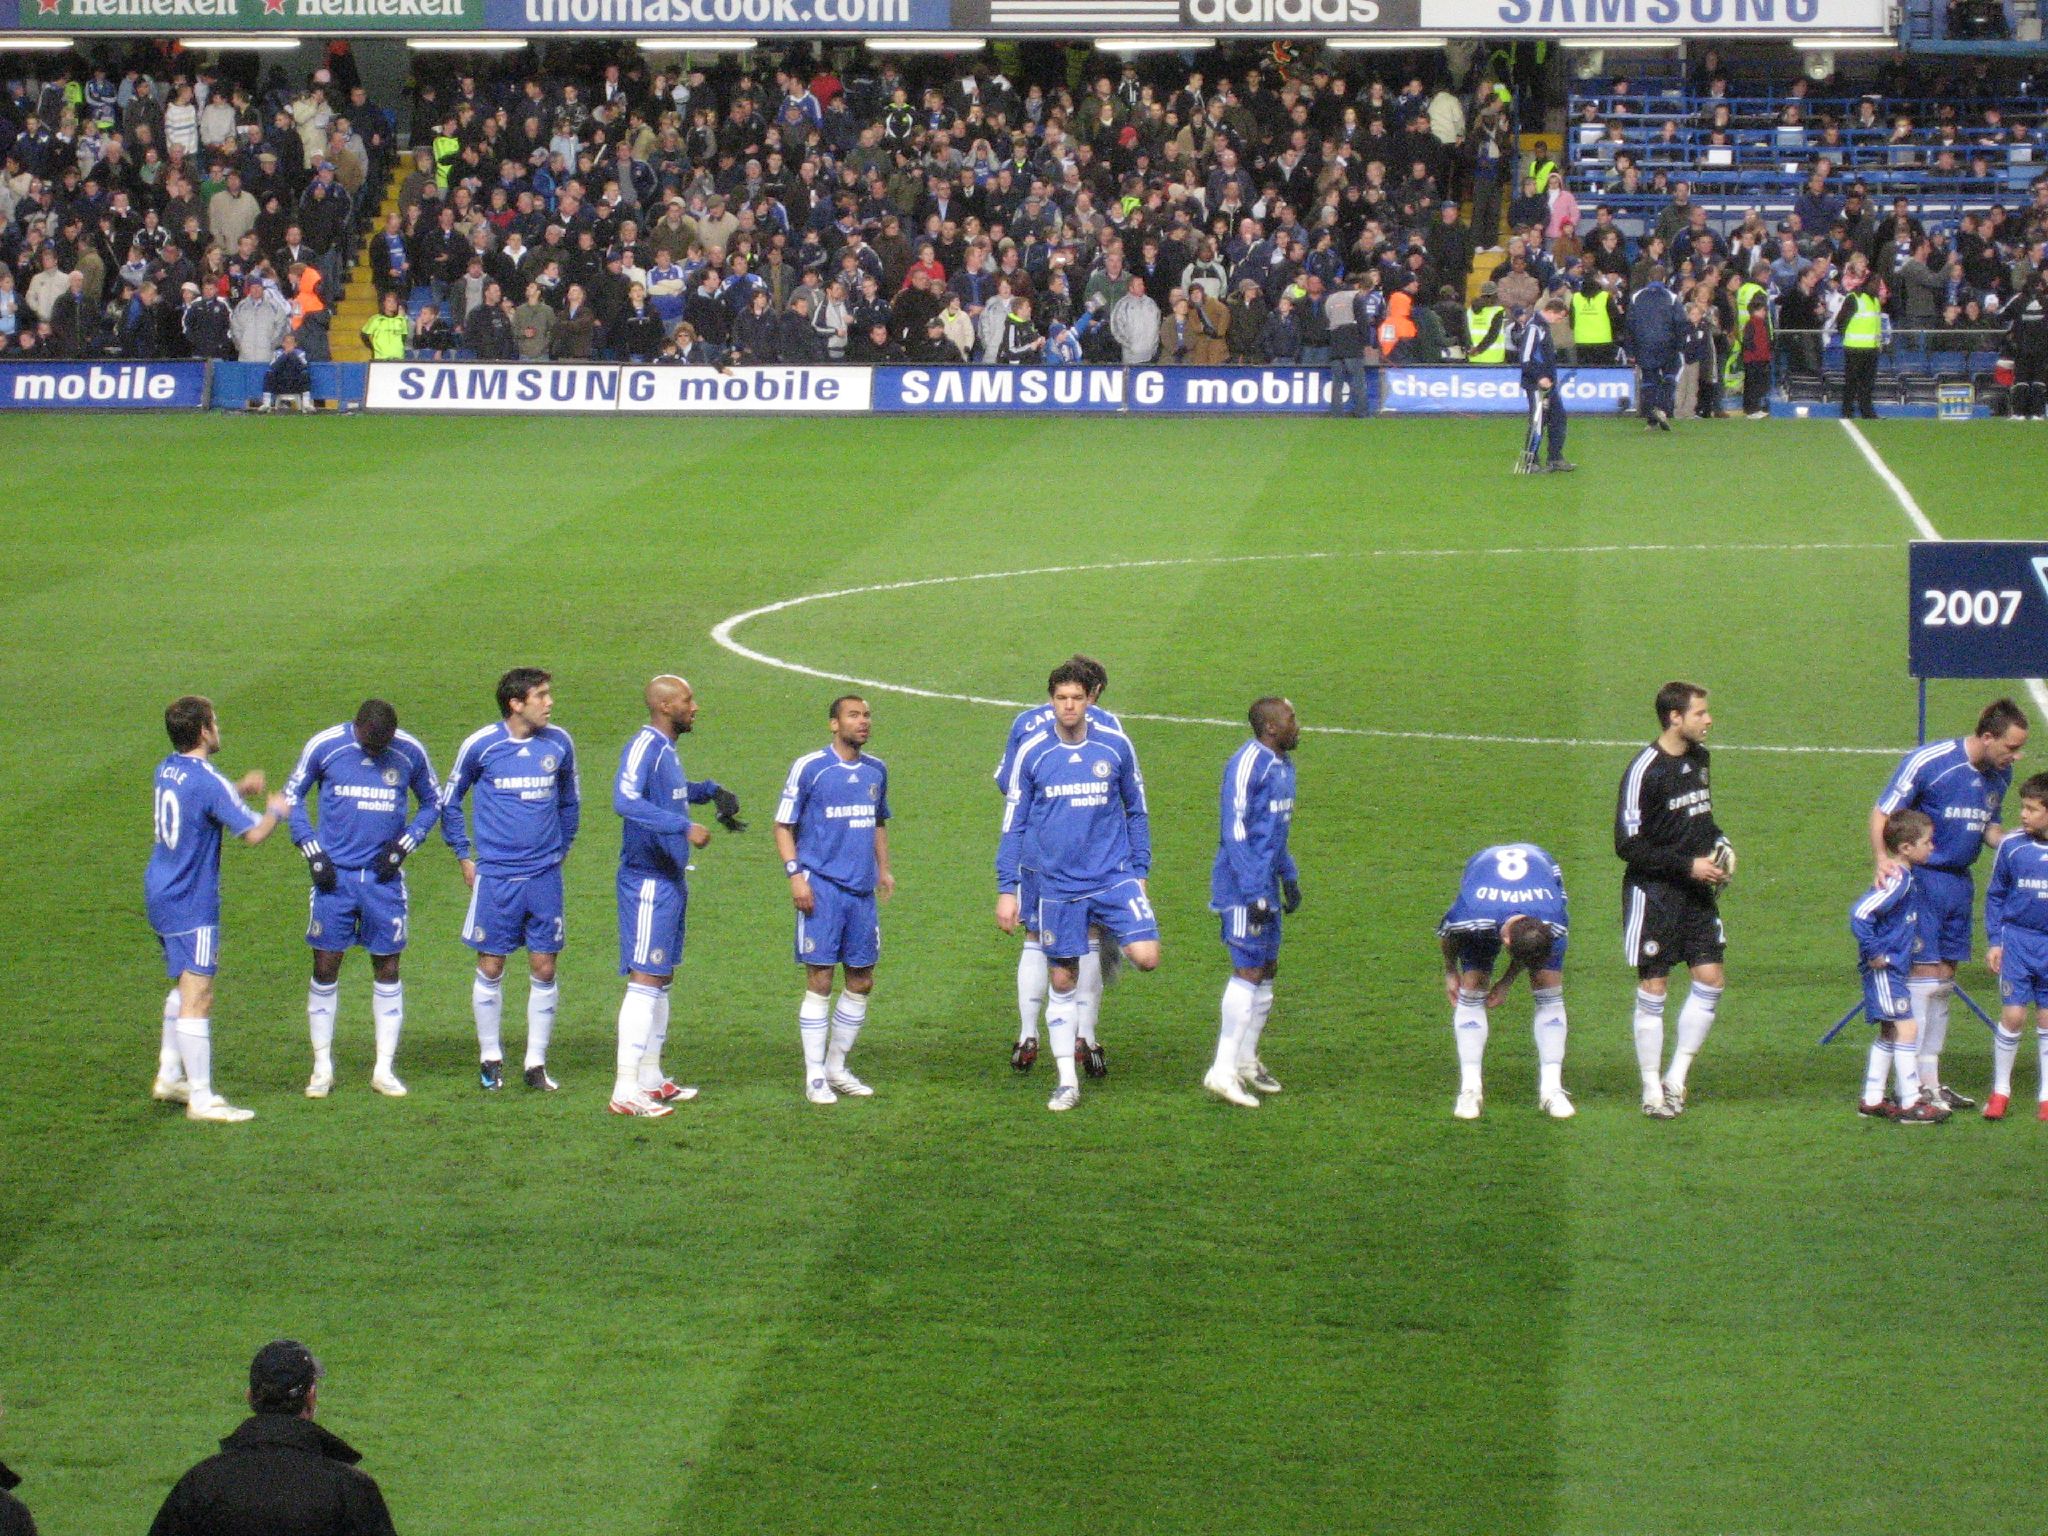 the soccer team stands on the field in formation